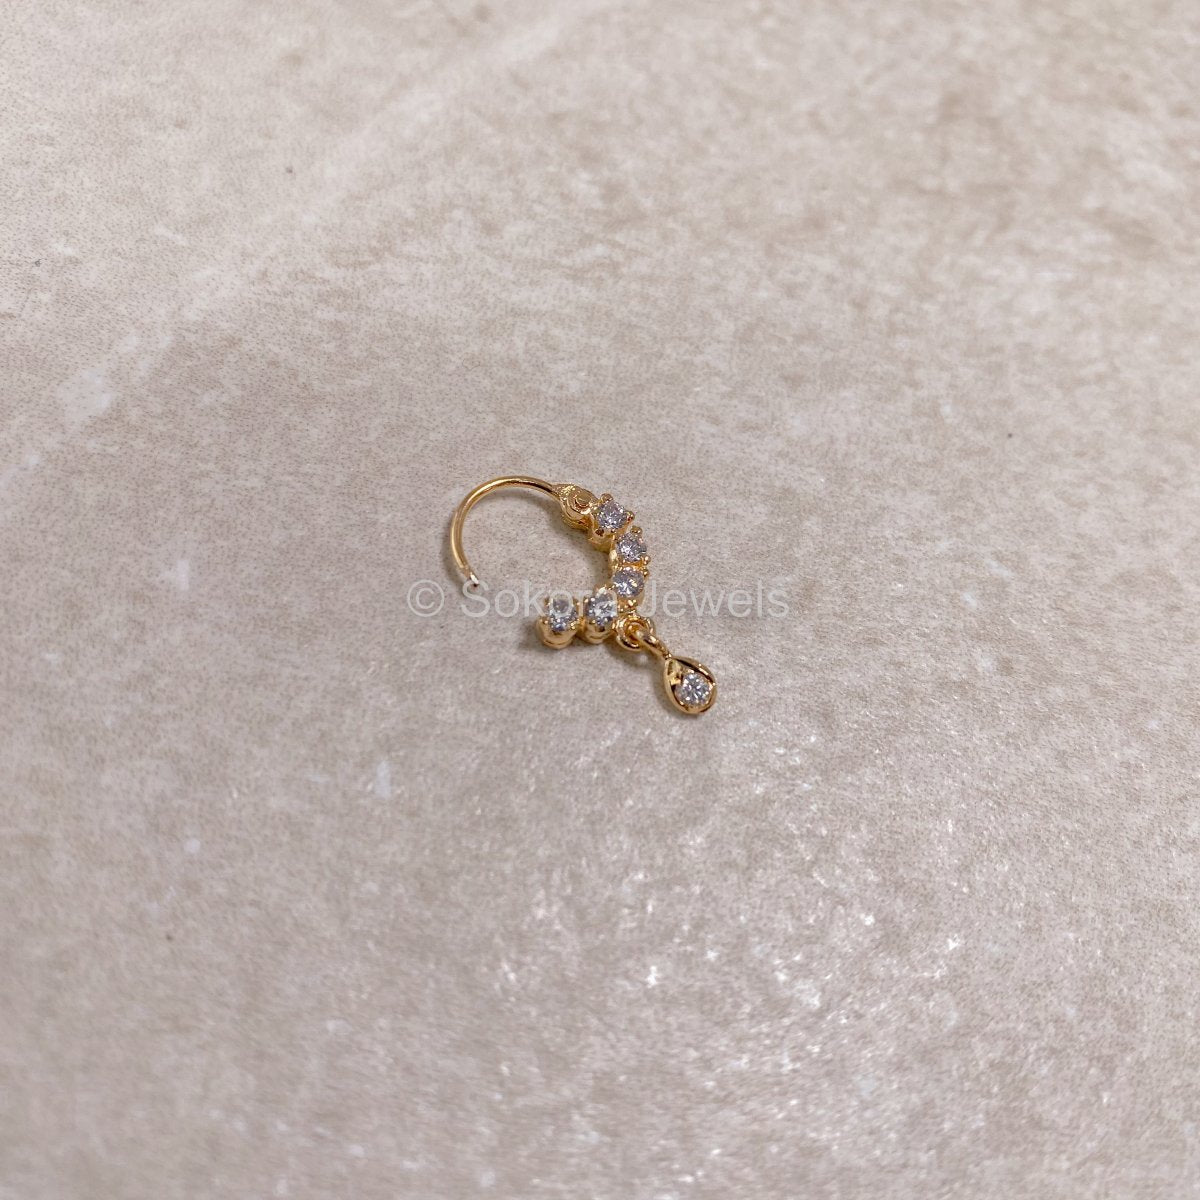 Amazon.com: 14K Gold Nose Stud, Indian Screw Nose Ring Piercing Jewelry,  Butterfly Moth Shaped, Fits also Tragus, Cartilage, Helix Earring, 20g,  Unique Handmade Jewelry : Handmade Products